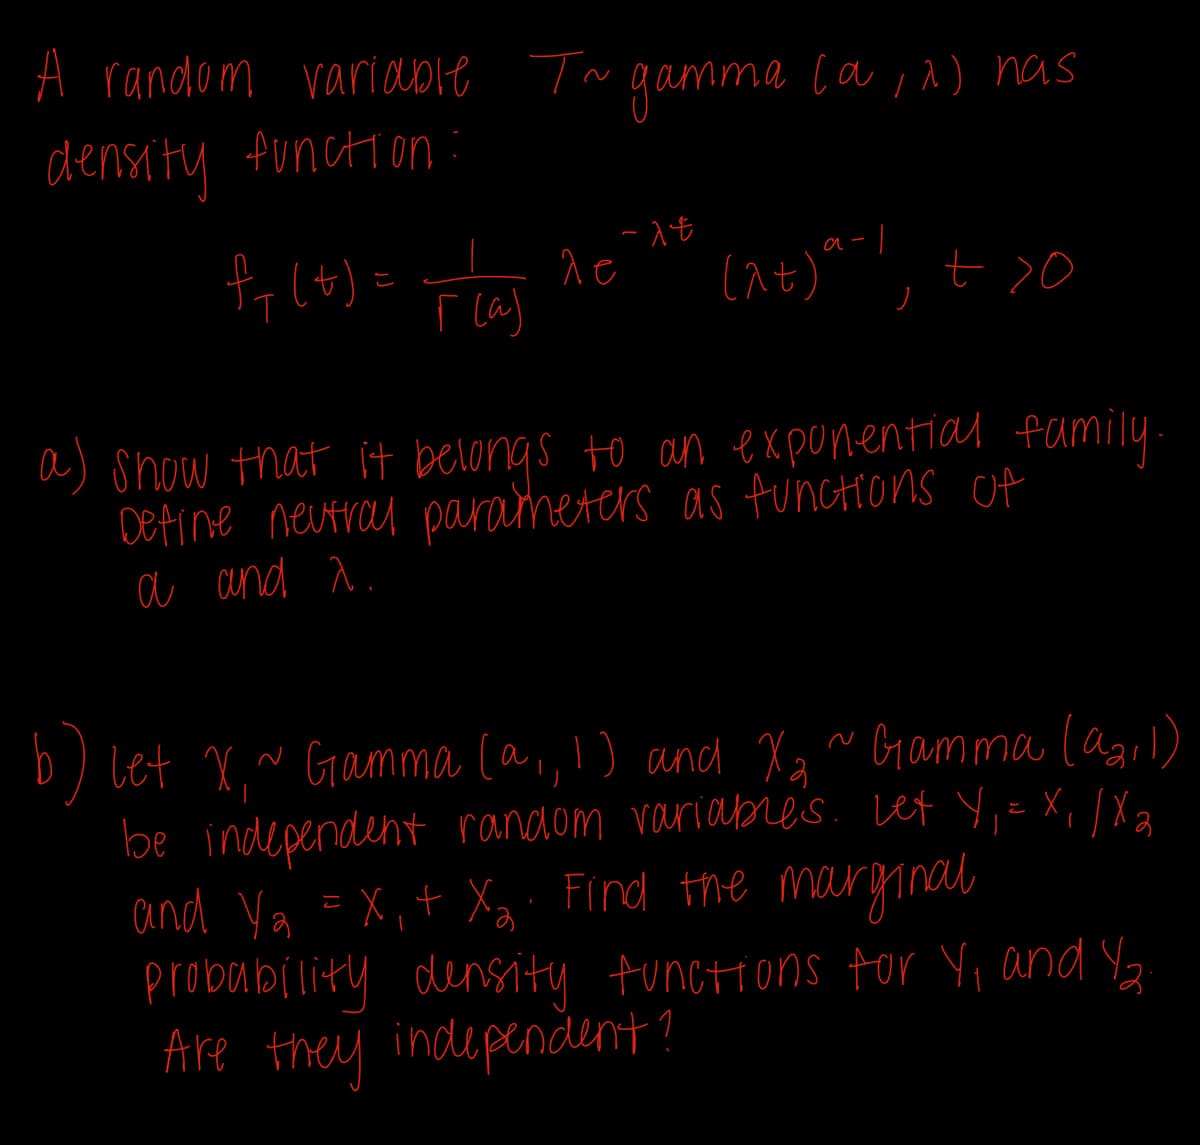 A random variable T~ gamma (a,^) has
density function
fy(t) = plas
r(a)
ле
-1t
0<7' 1-6 (76)
a) show that it belongs to an exponential family.
Define neutral parameters as functions of
a and a.
let X,~ Gamma (a,, 1) and X₂ ~ Gamma (921)
be independent random variables. Lex Y₁ = X₁/X₂
and Ya =X₁ + X₂. Find the marginal
probability density functions for Y₁ and Y2
Are they independent?